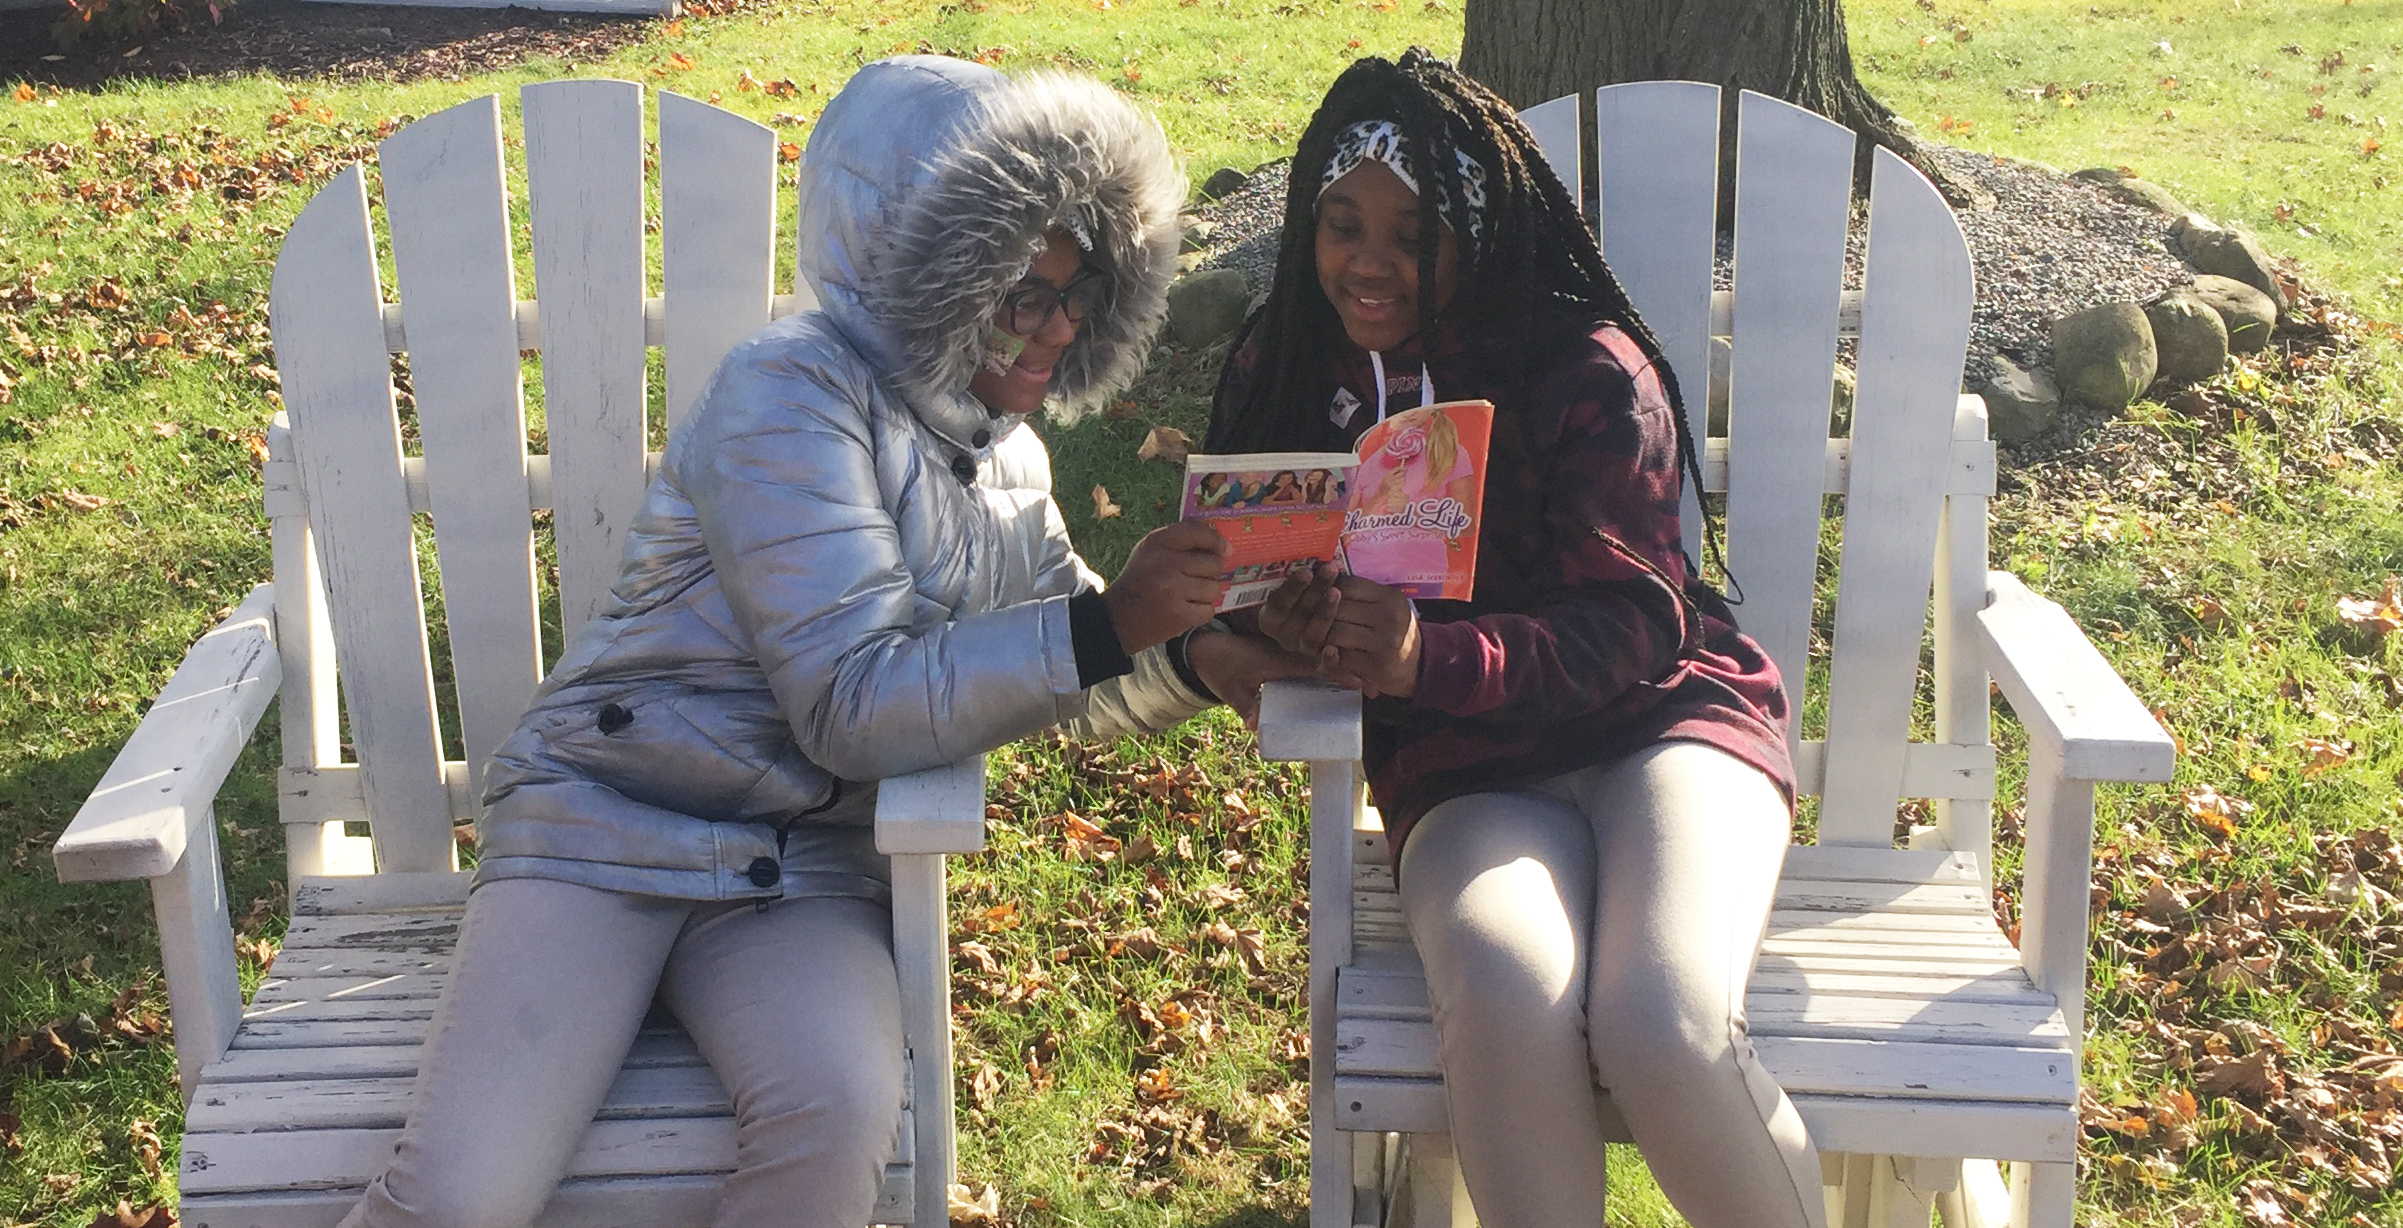 Middle school PBL students visit the local neighborhood Little Free Libraries to gather inspiration for their upcoming project